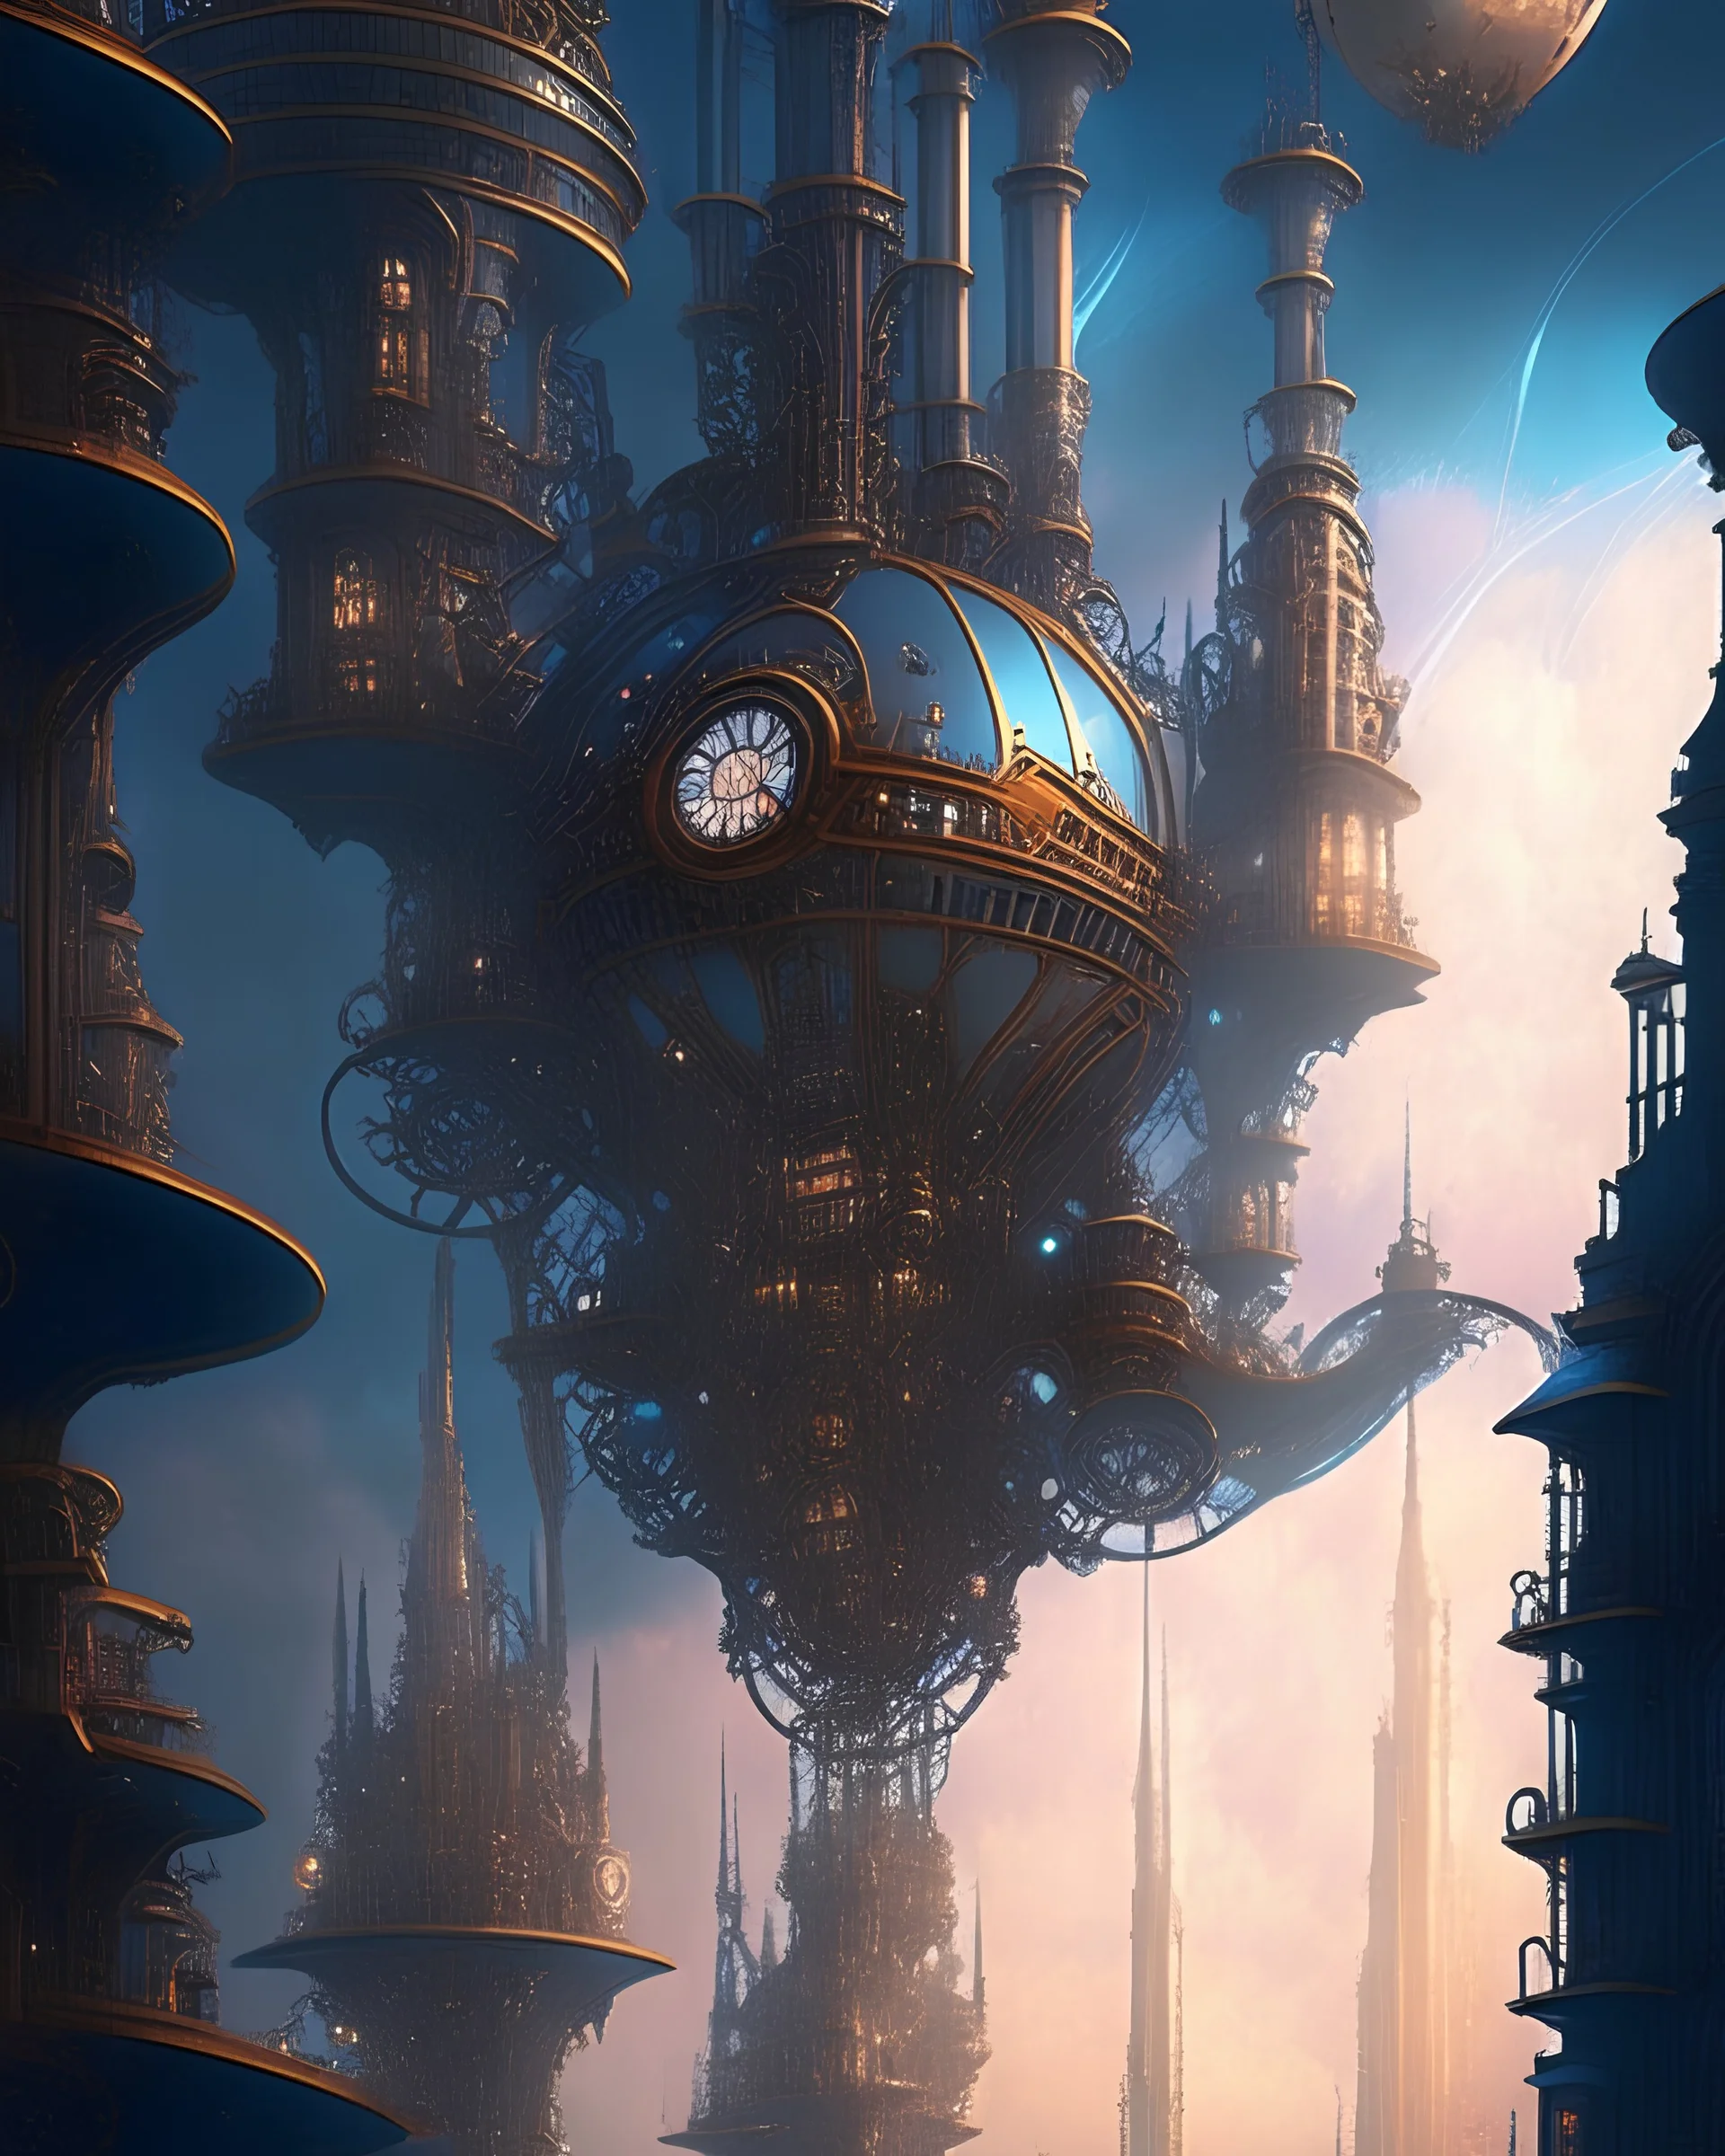 A fantastical steampunk city suspended in the sky, powered by intricate clockwork mechanisms and steam engines, in the style of Gothic architecture fused with futurism, dramatic lighting, fine details, and atmospheric perspective, 12K resolution, inspired by the works of François Schuiten and Mike Mignola, celebrating the potential of human ingenuity.